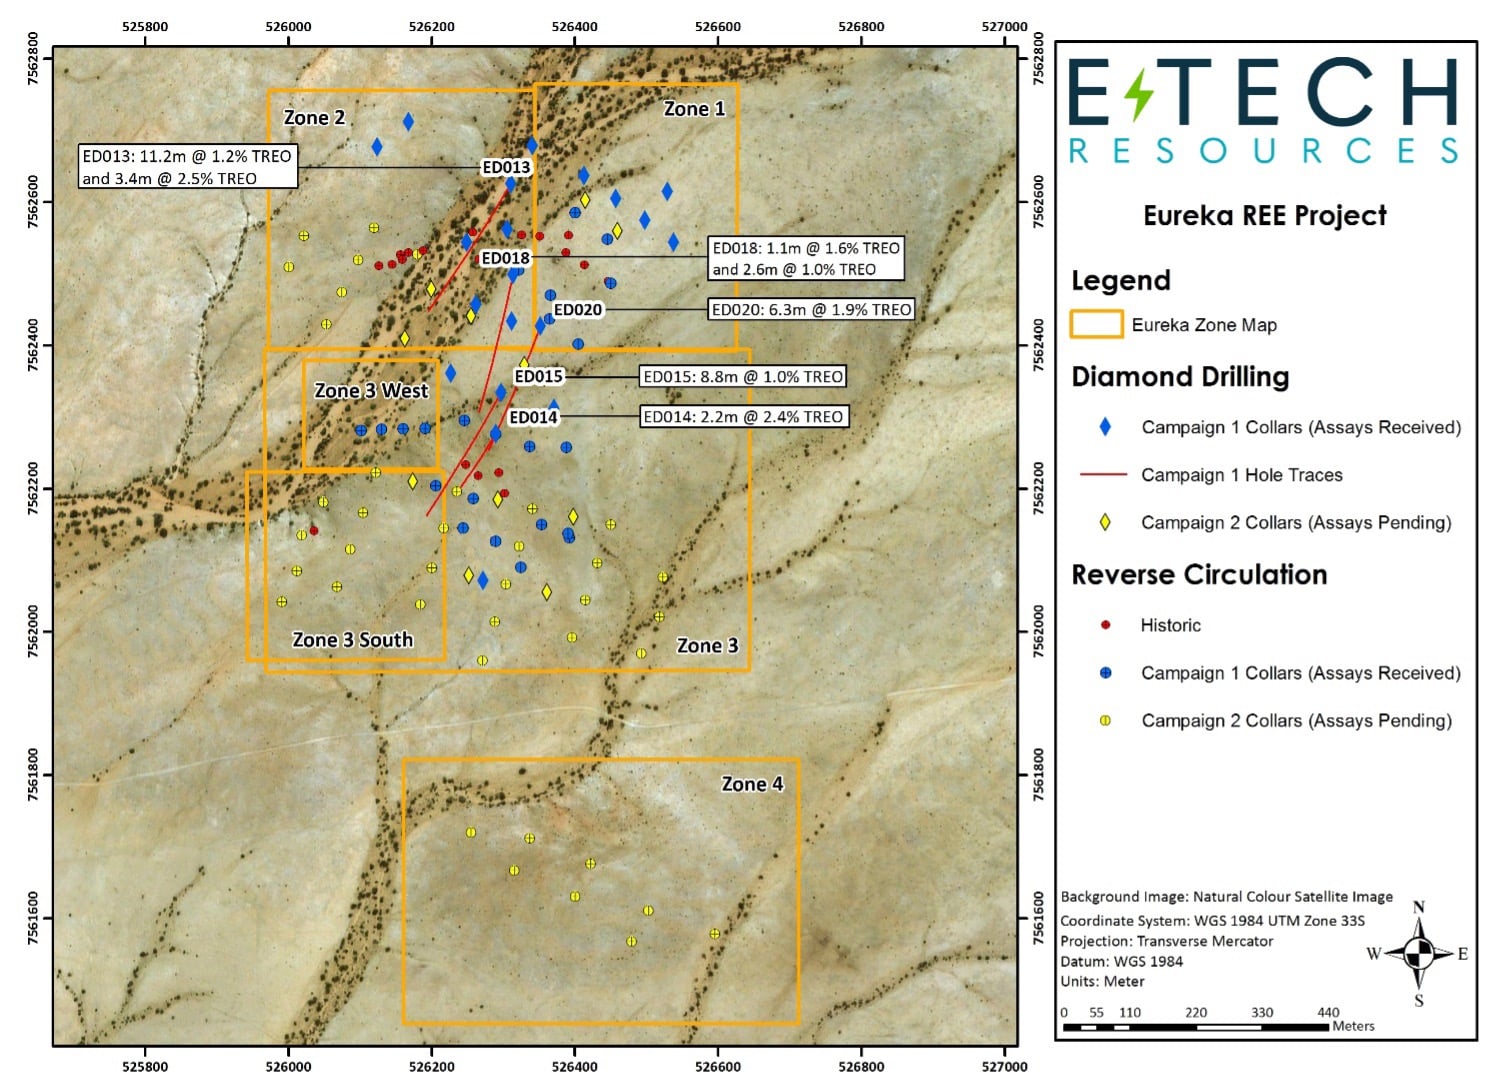 E-Tech Resources Inc Final Assay Results of Phase 1 Diamond Drilling Programme Eureka Project Namibia